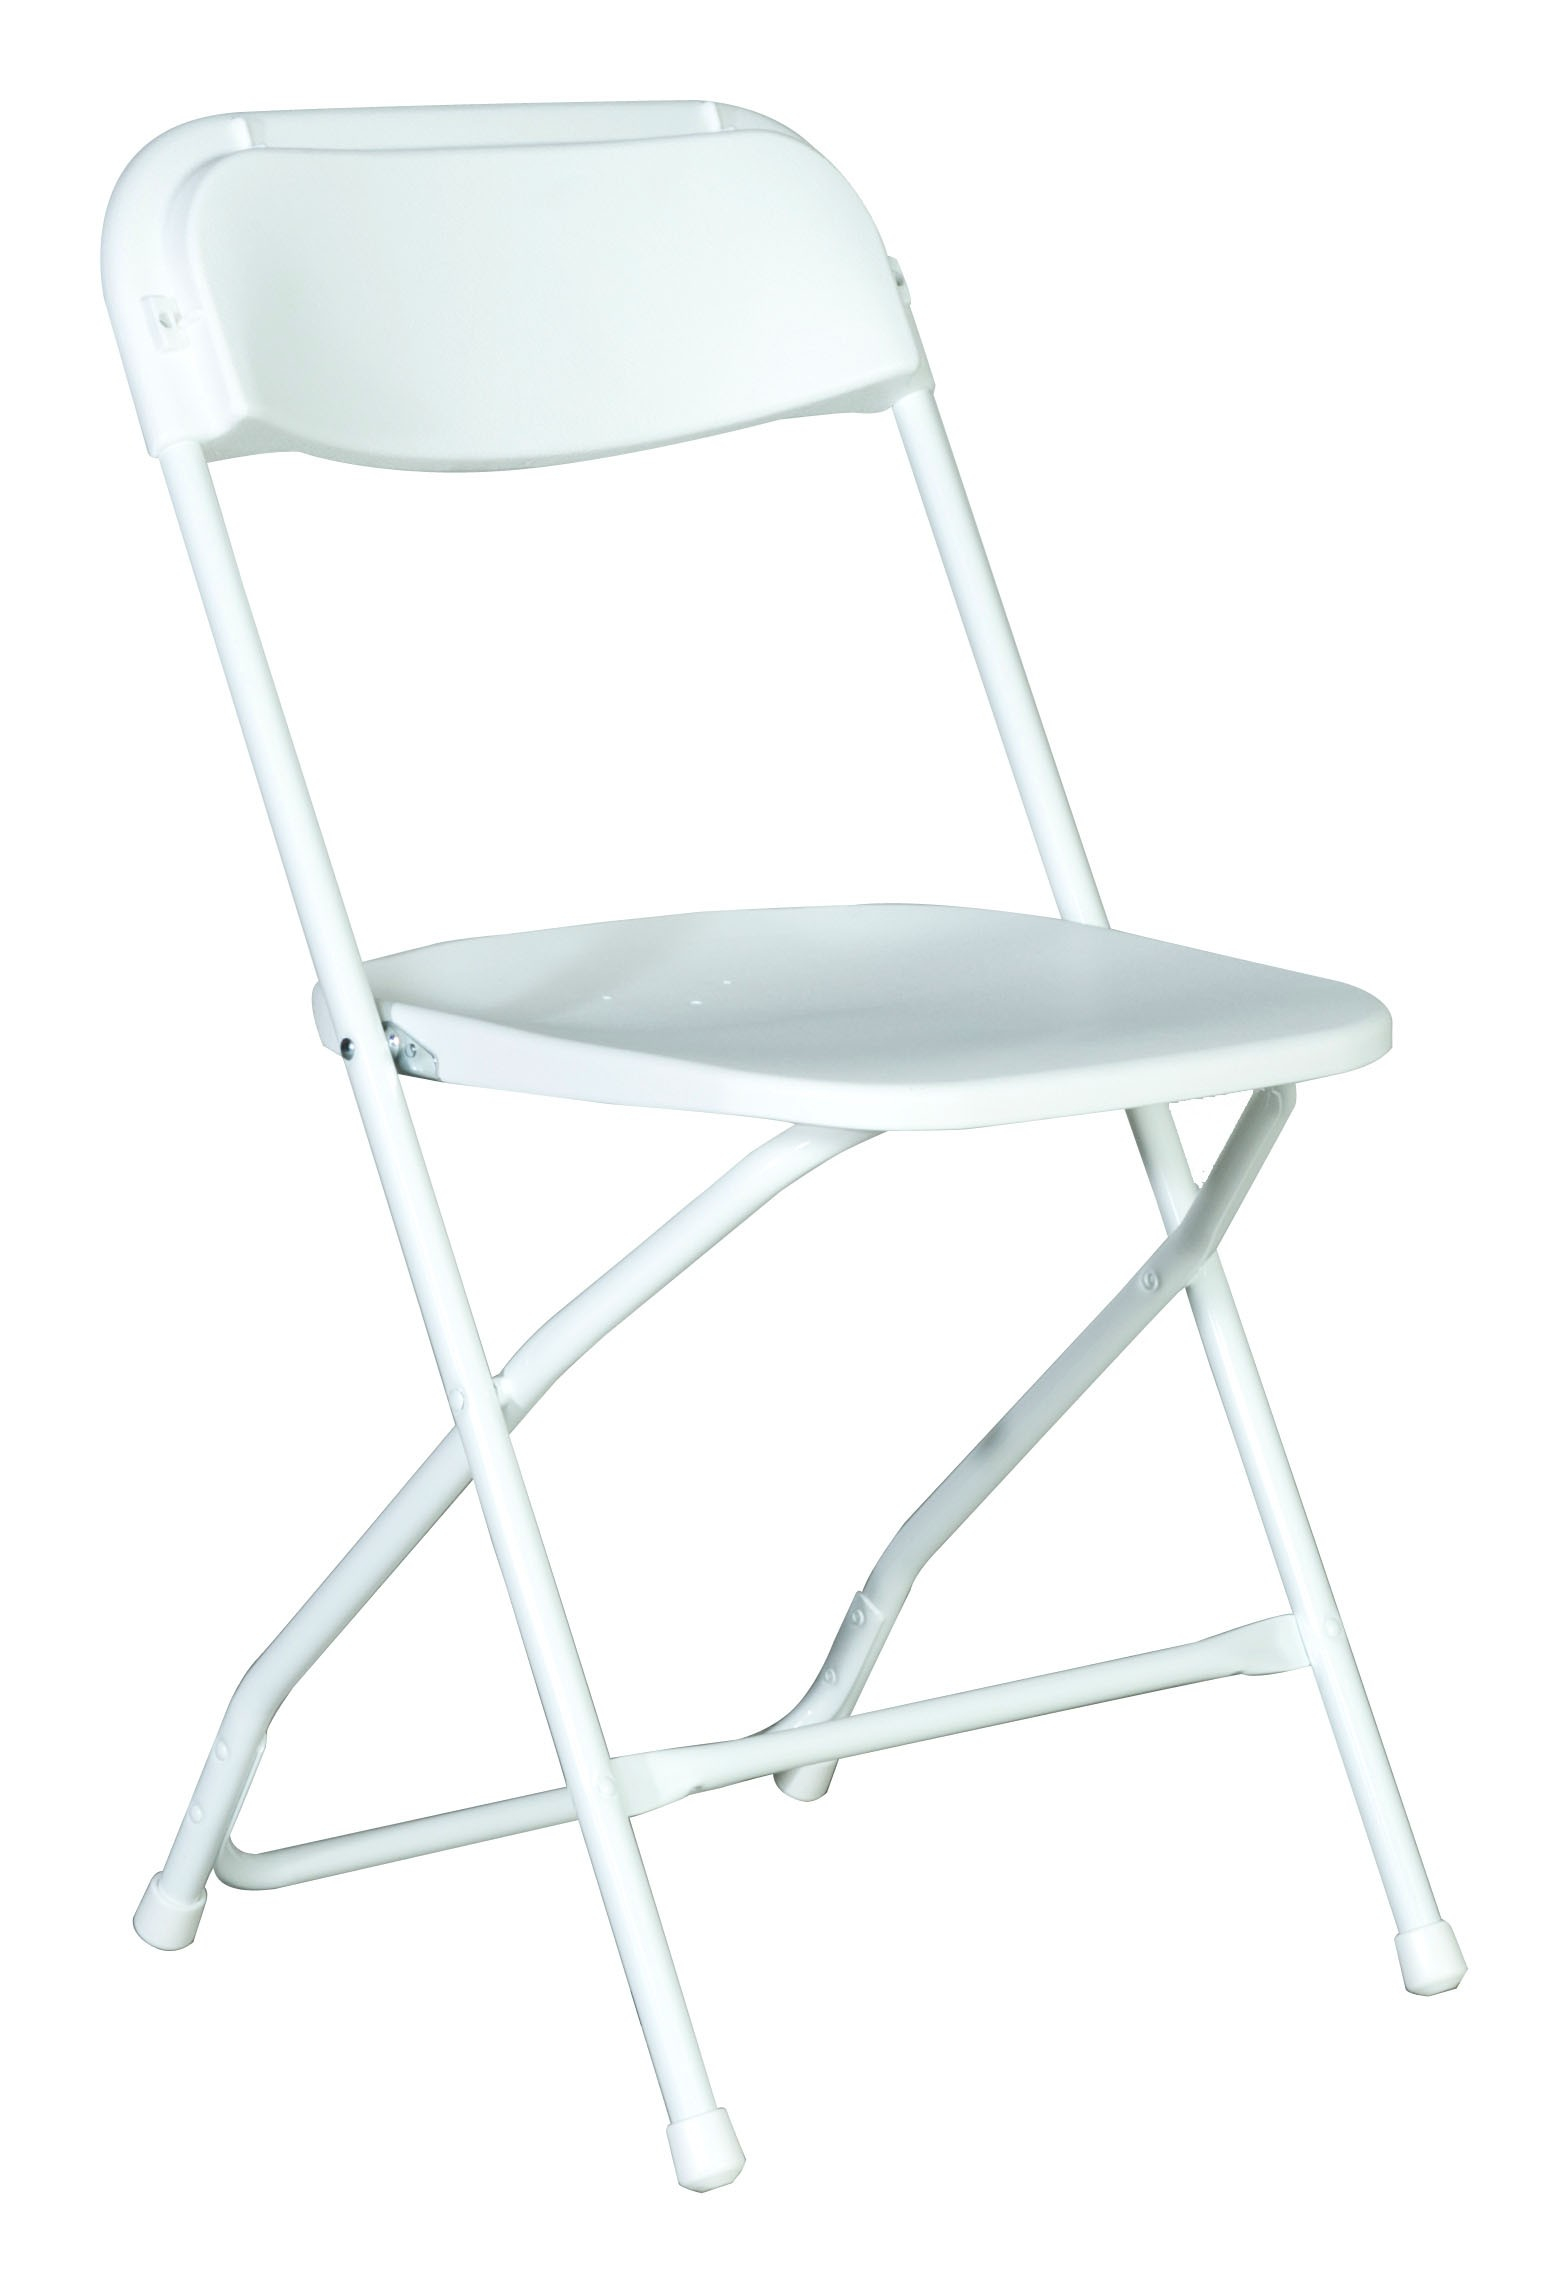 cheap table and chair rentals